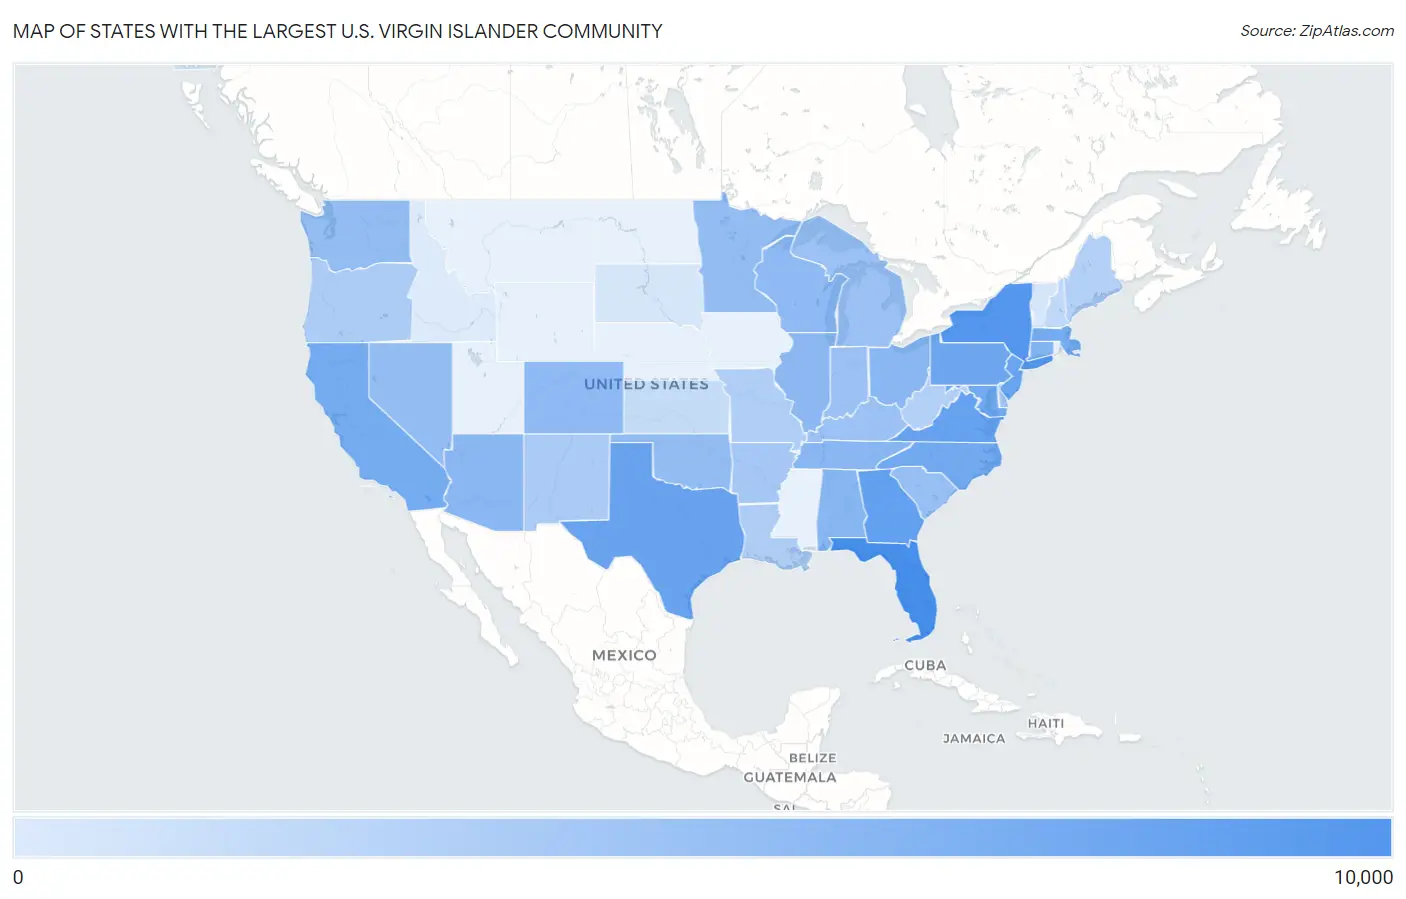 States with the Largest U.S. Virgin Islander Community in the United States Map